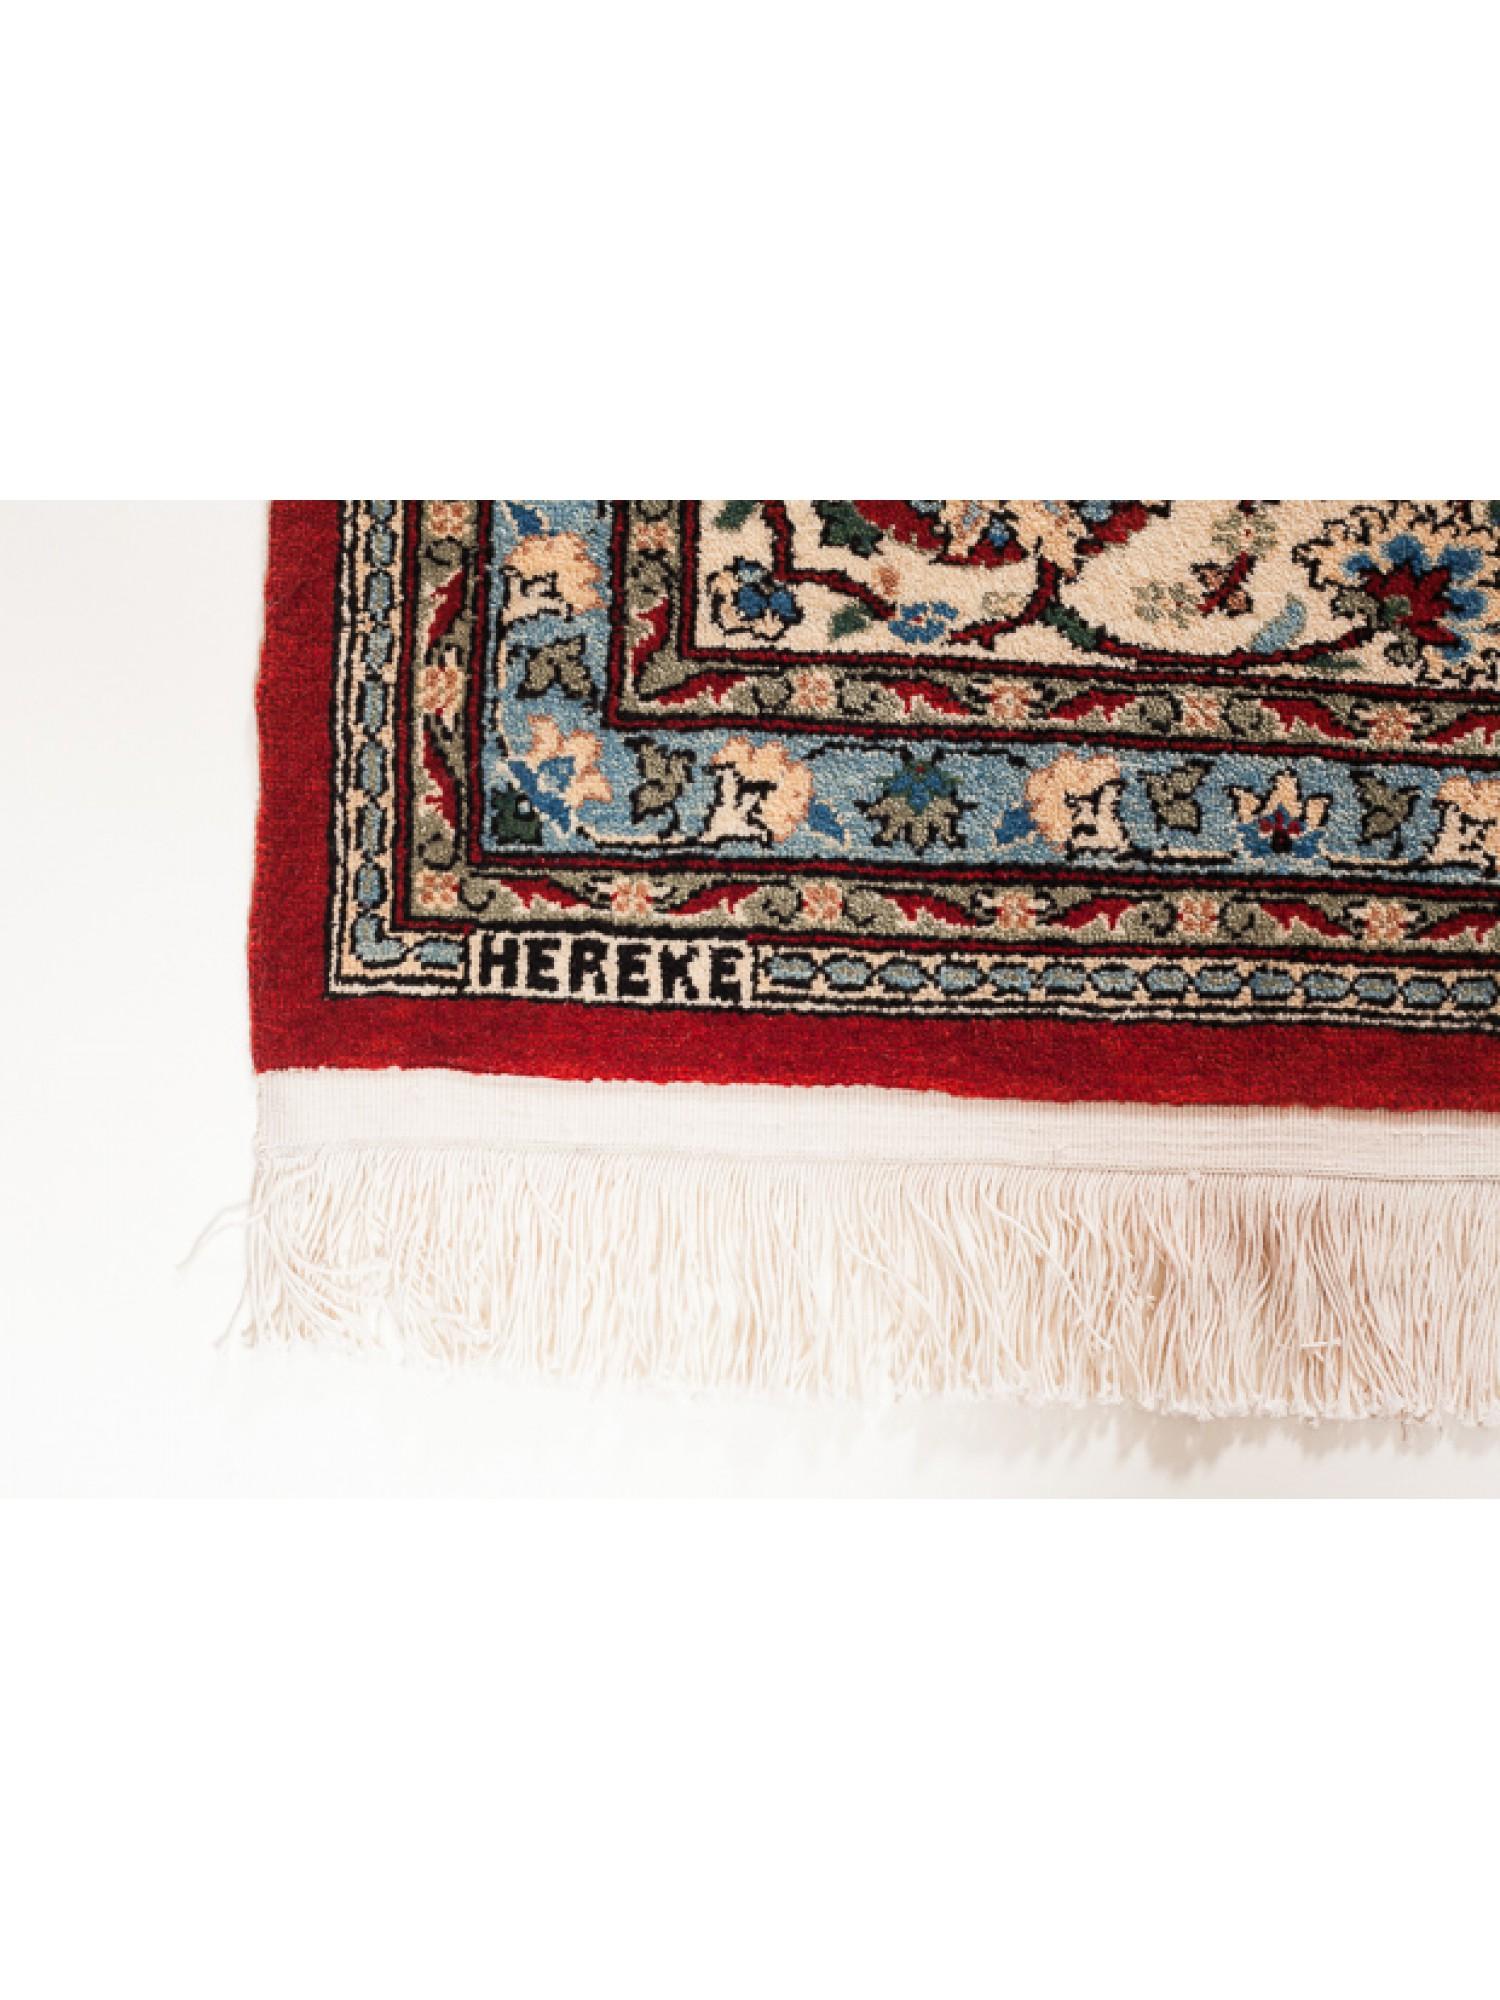 This unique Wool Hereke Carpet is among the highest-quality carpets in the Hereke workshop. There is a flower lattice on a deep red background with the fineness of the weave, the use of color, and the elegant and sophisticated design. It is a piece